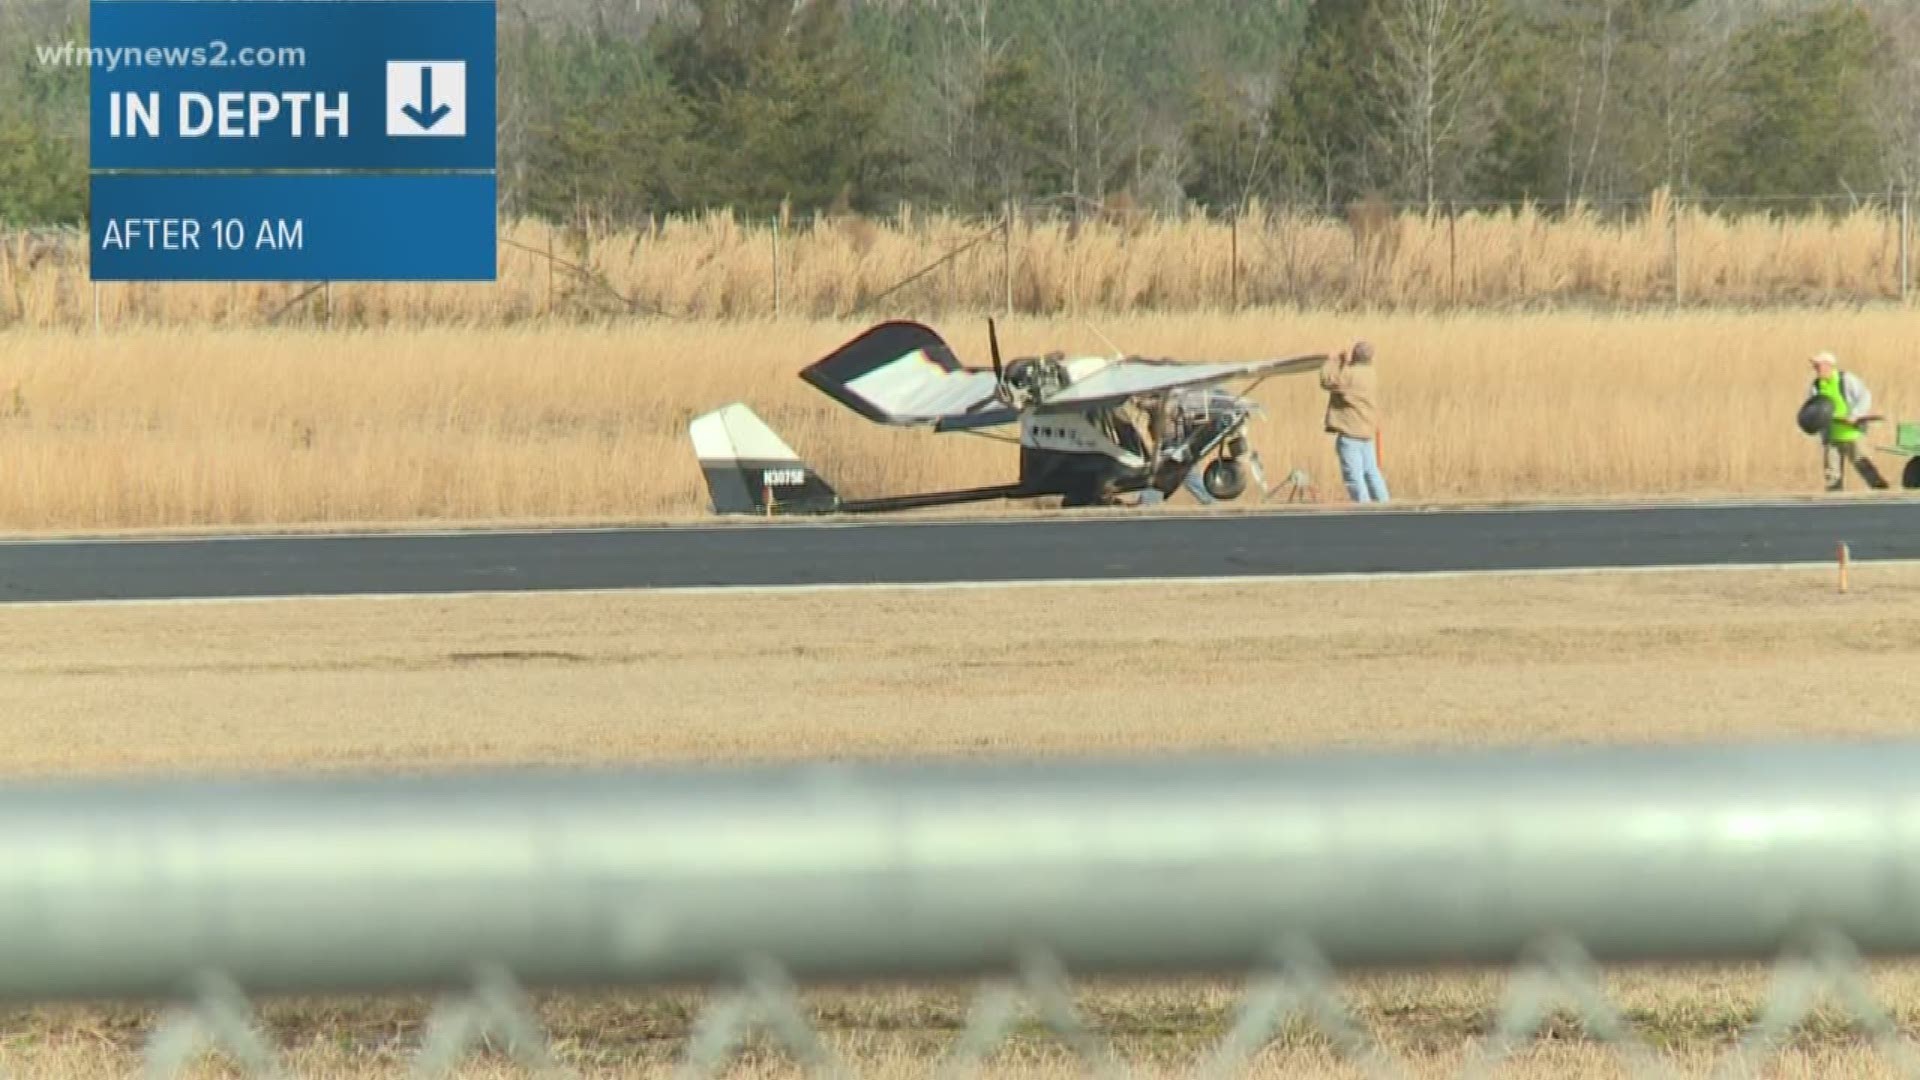 No deaths but a minor injury was reported at the Shiloh airport this morning